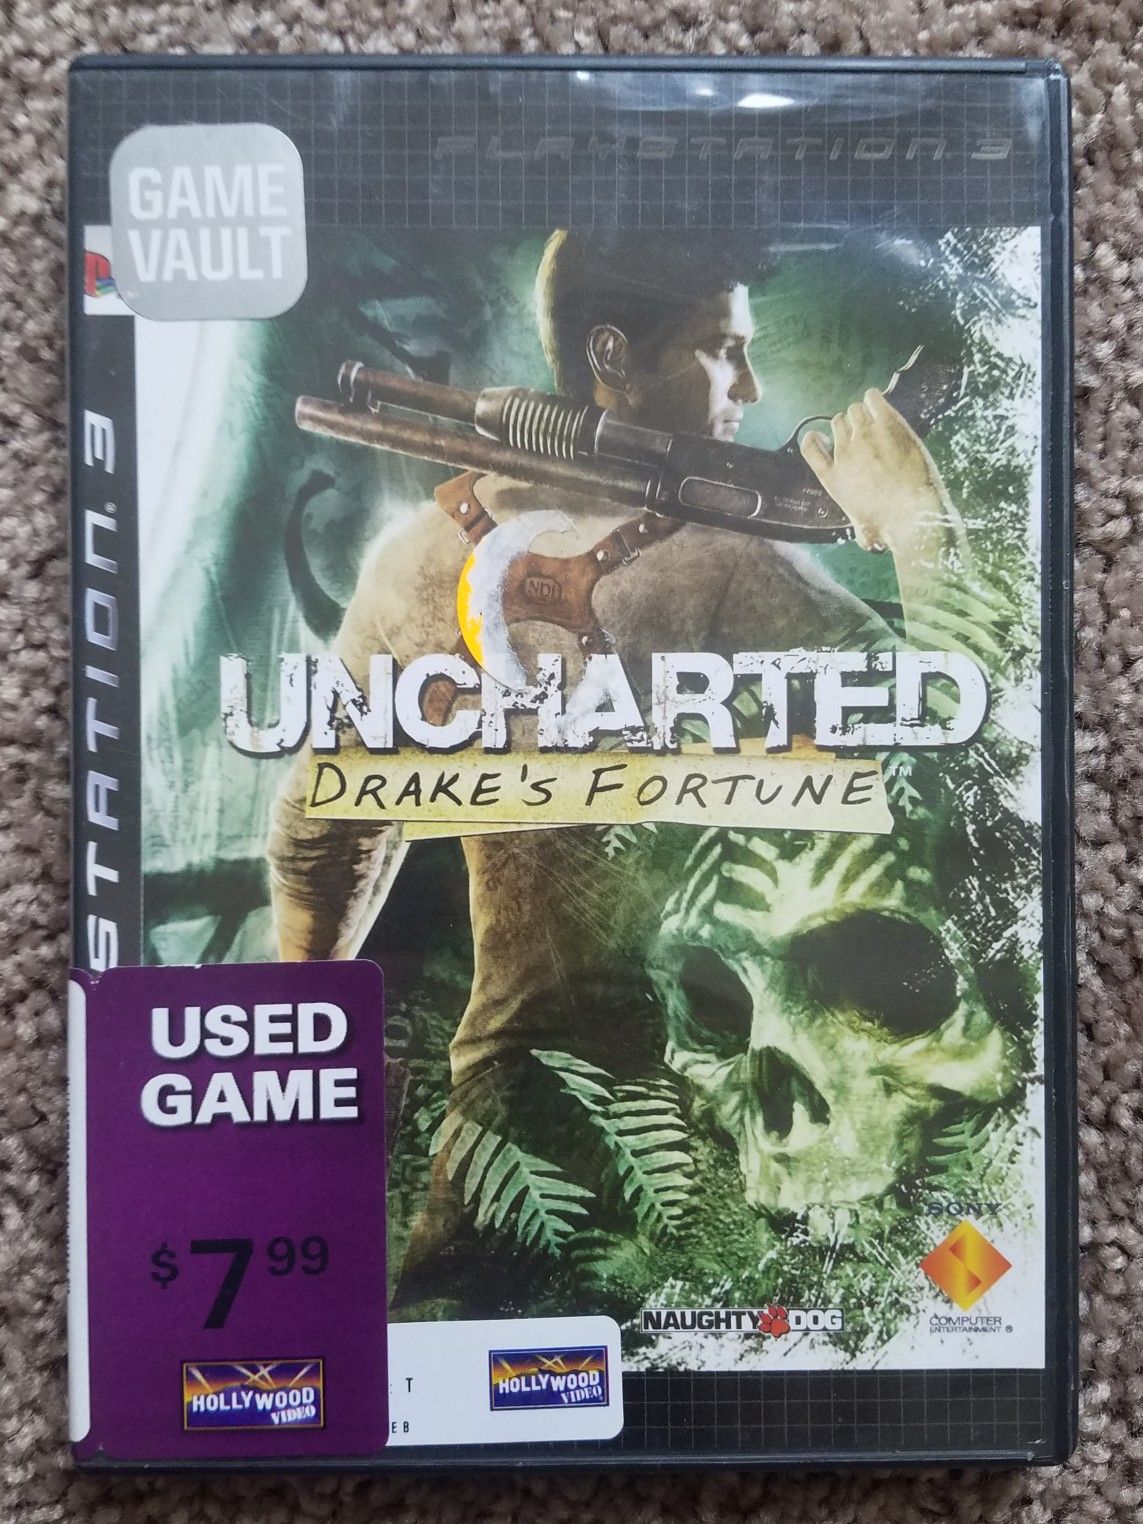 Uncharted Drake's fortune ps3 game